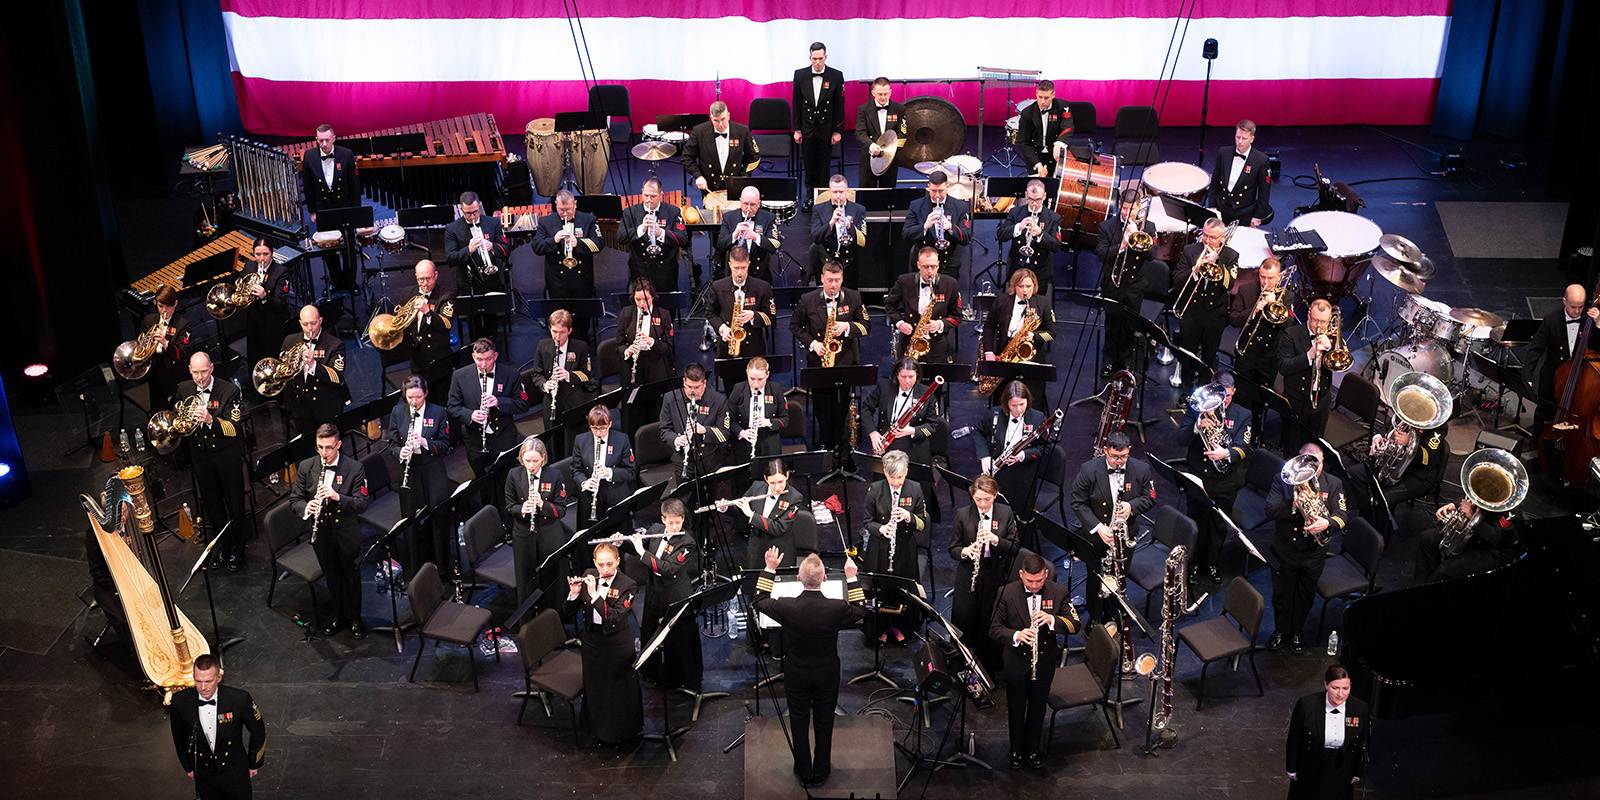 A military band performs on a dark stage in front of a large U.S. flag.